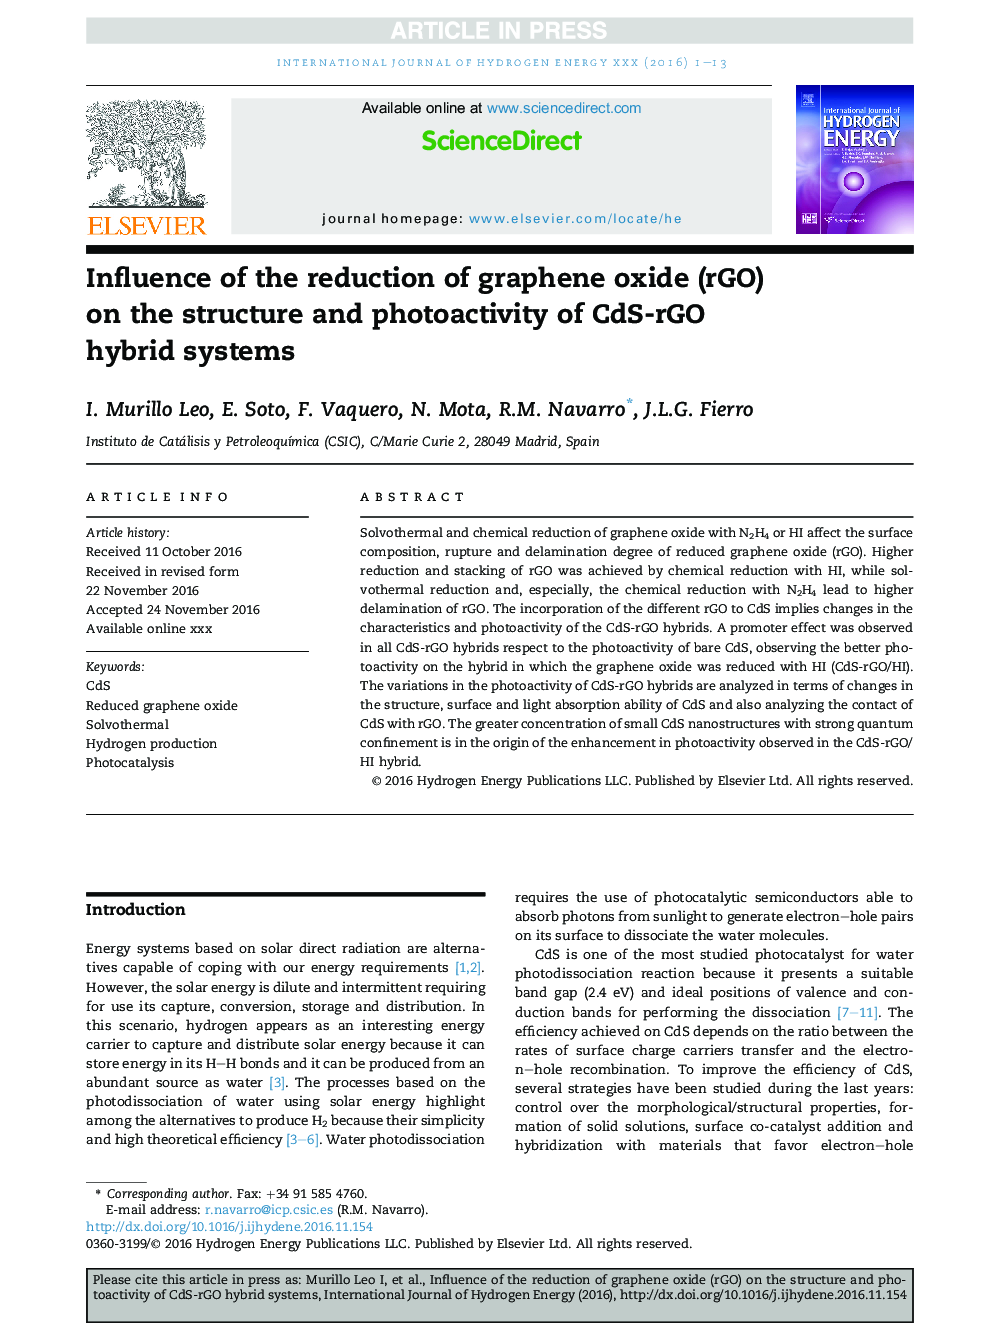 Influence of the reduction of graphene oxide (rGO) on the structure and photoactivity of CdS-rGO hybrid systems